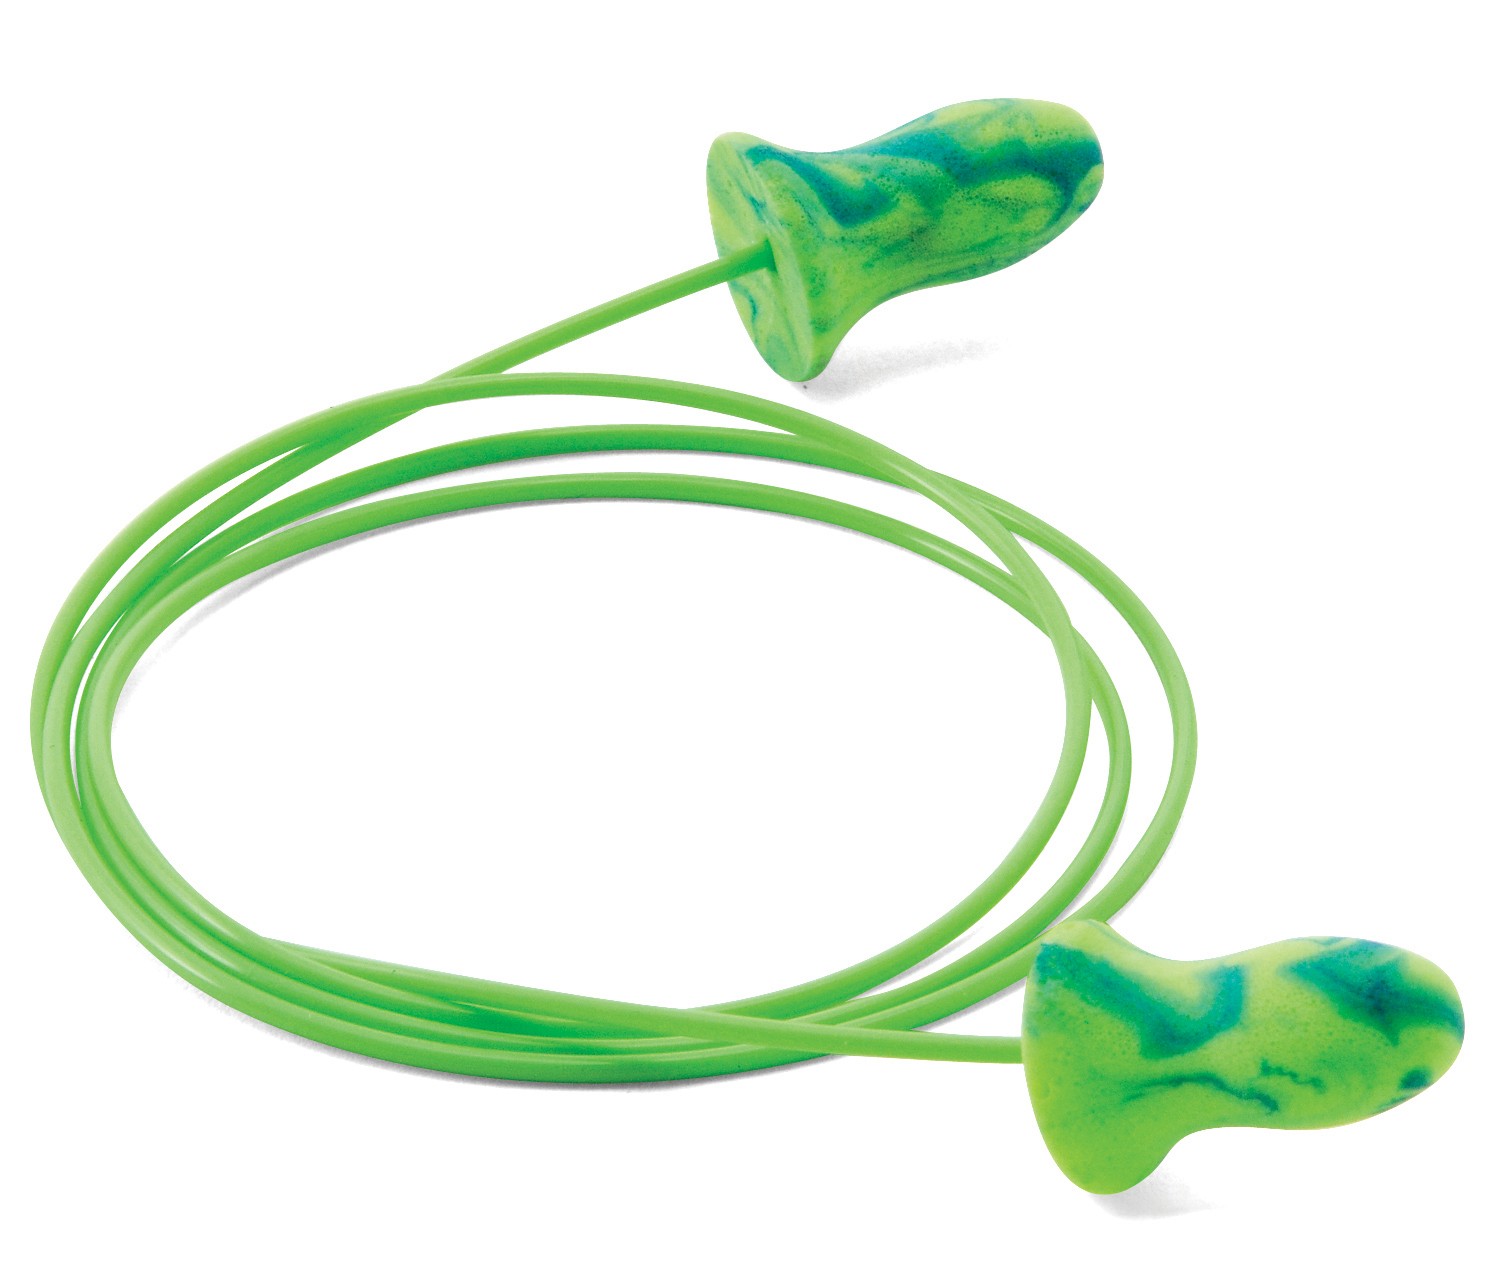 Earplug Disposable "METEOR" Small Corded NRR28 100/BX